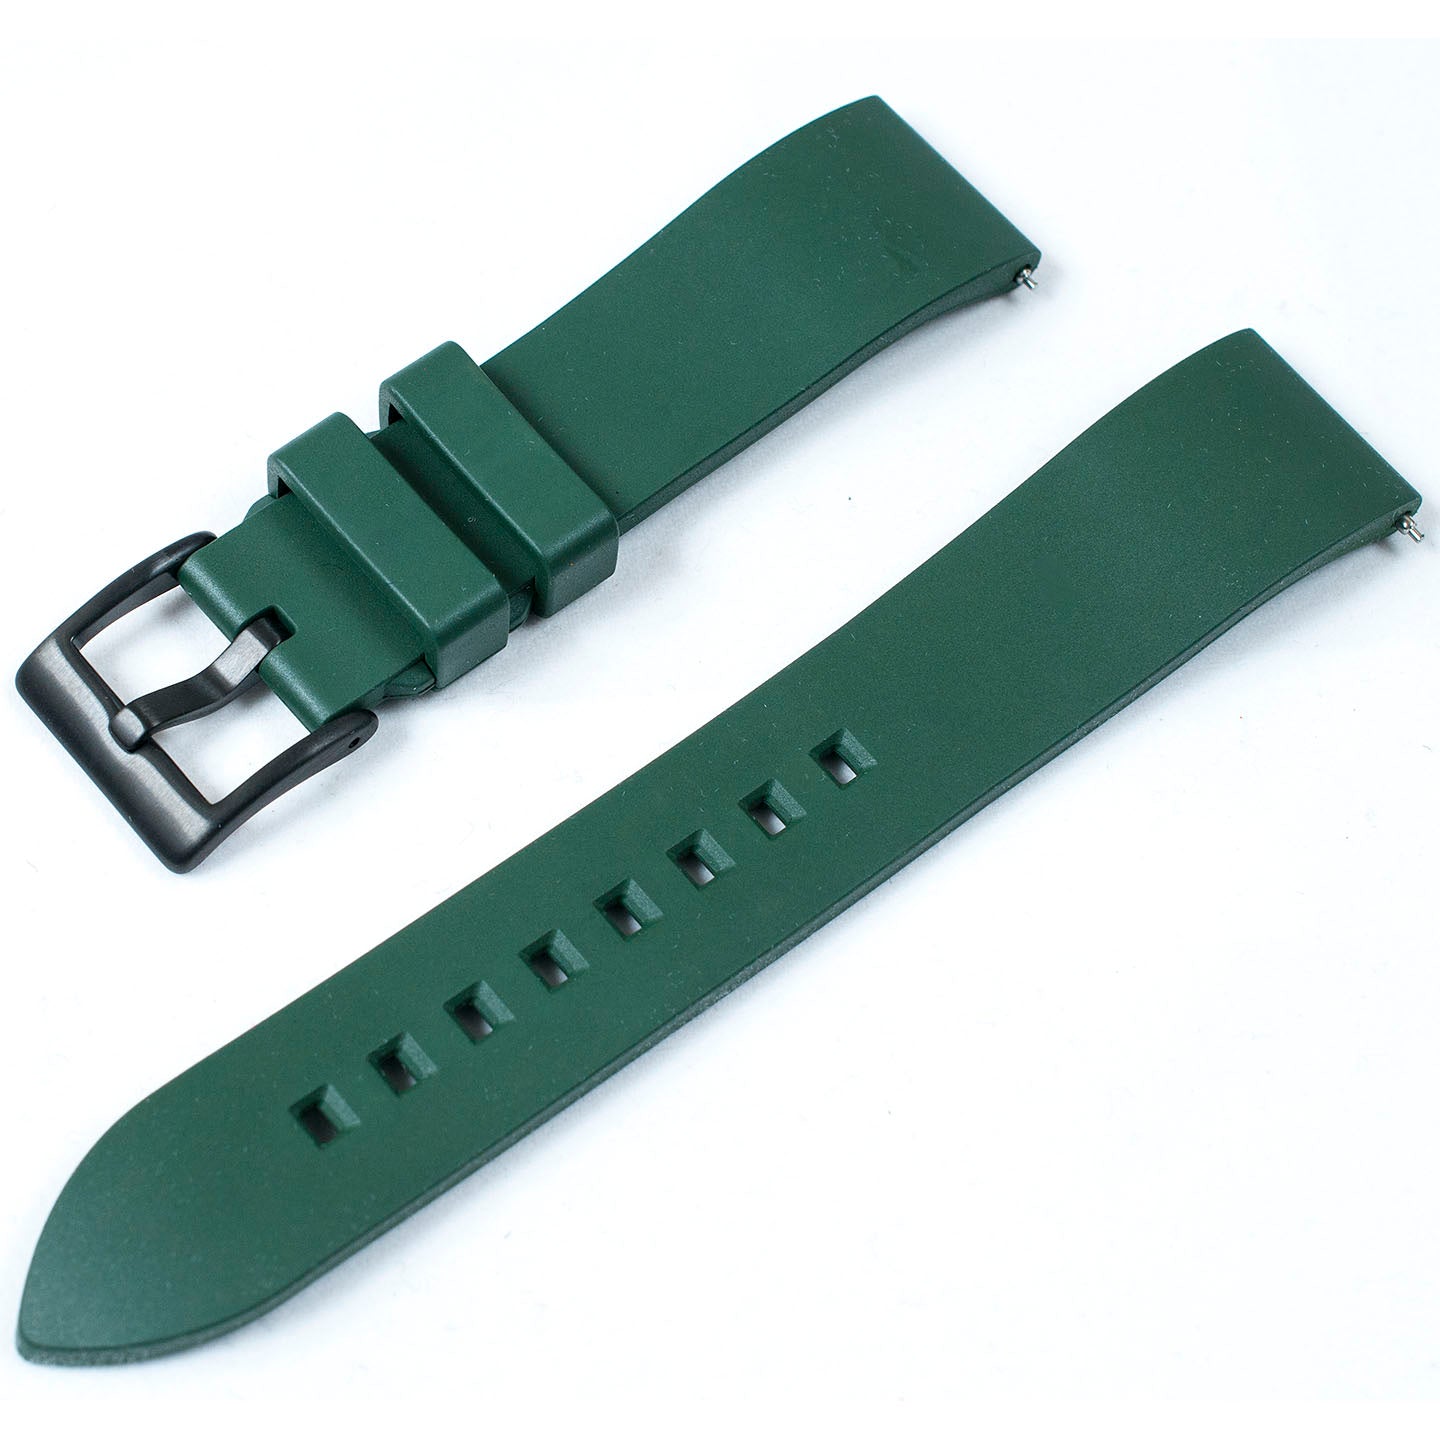 FKM Rubber Quick Release Replacement Watch Straps Bands 19mm 20,mm 21mm 22mm 24mm green with black buckle